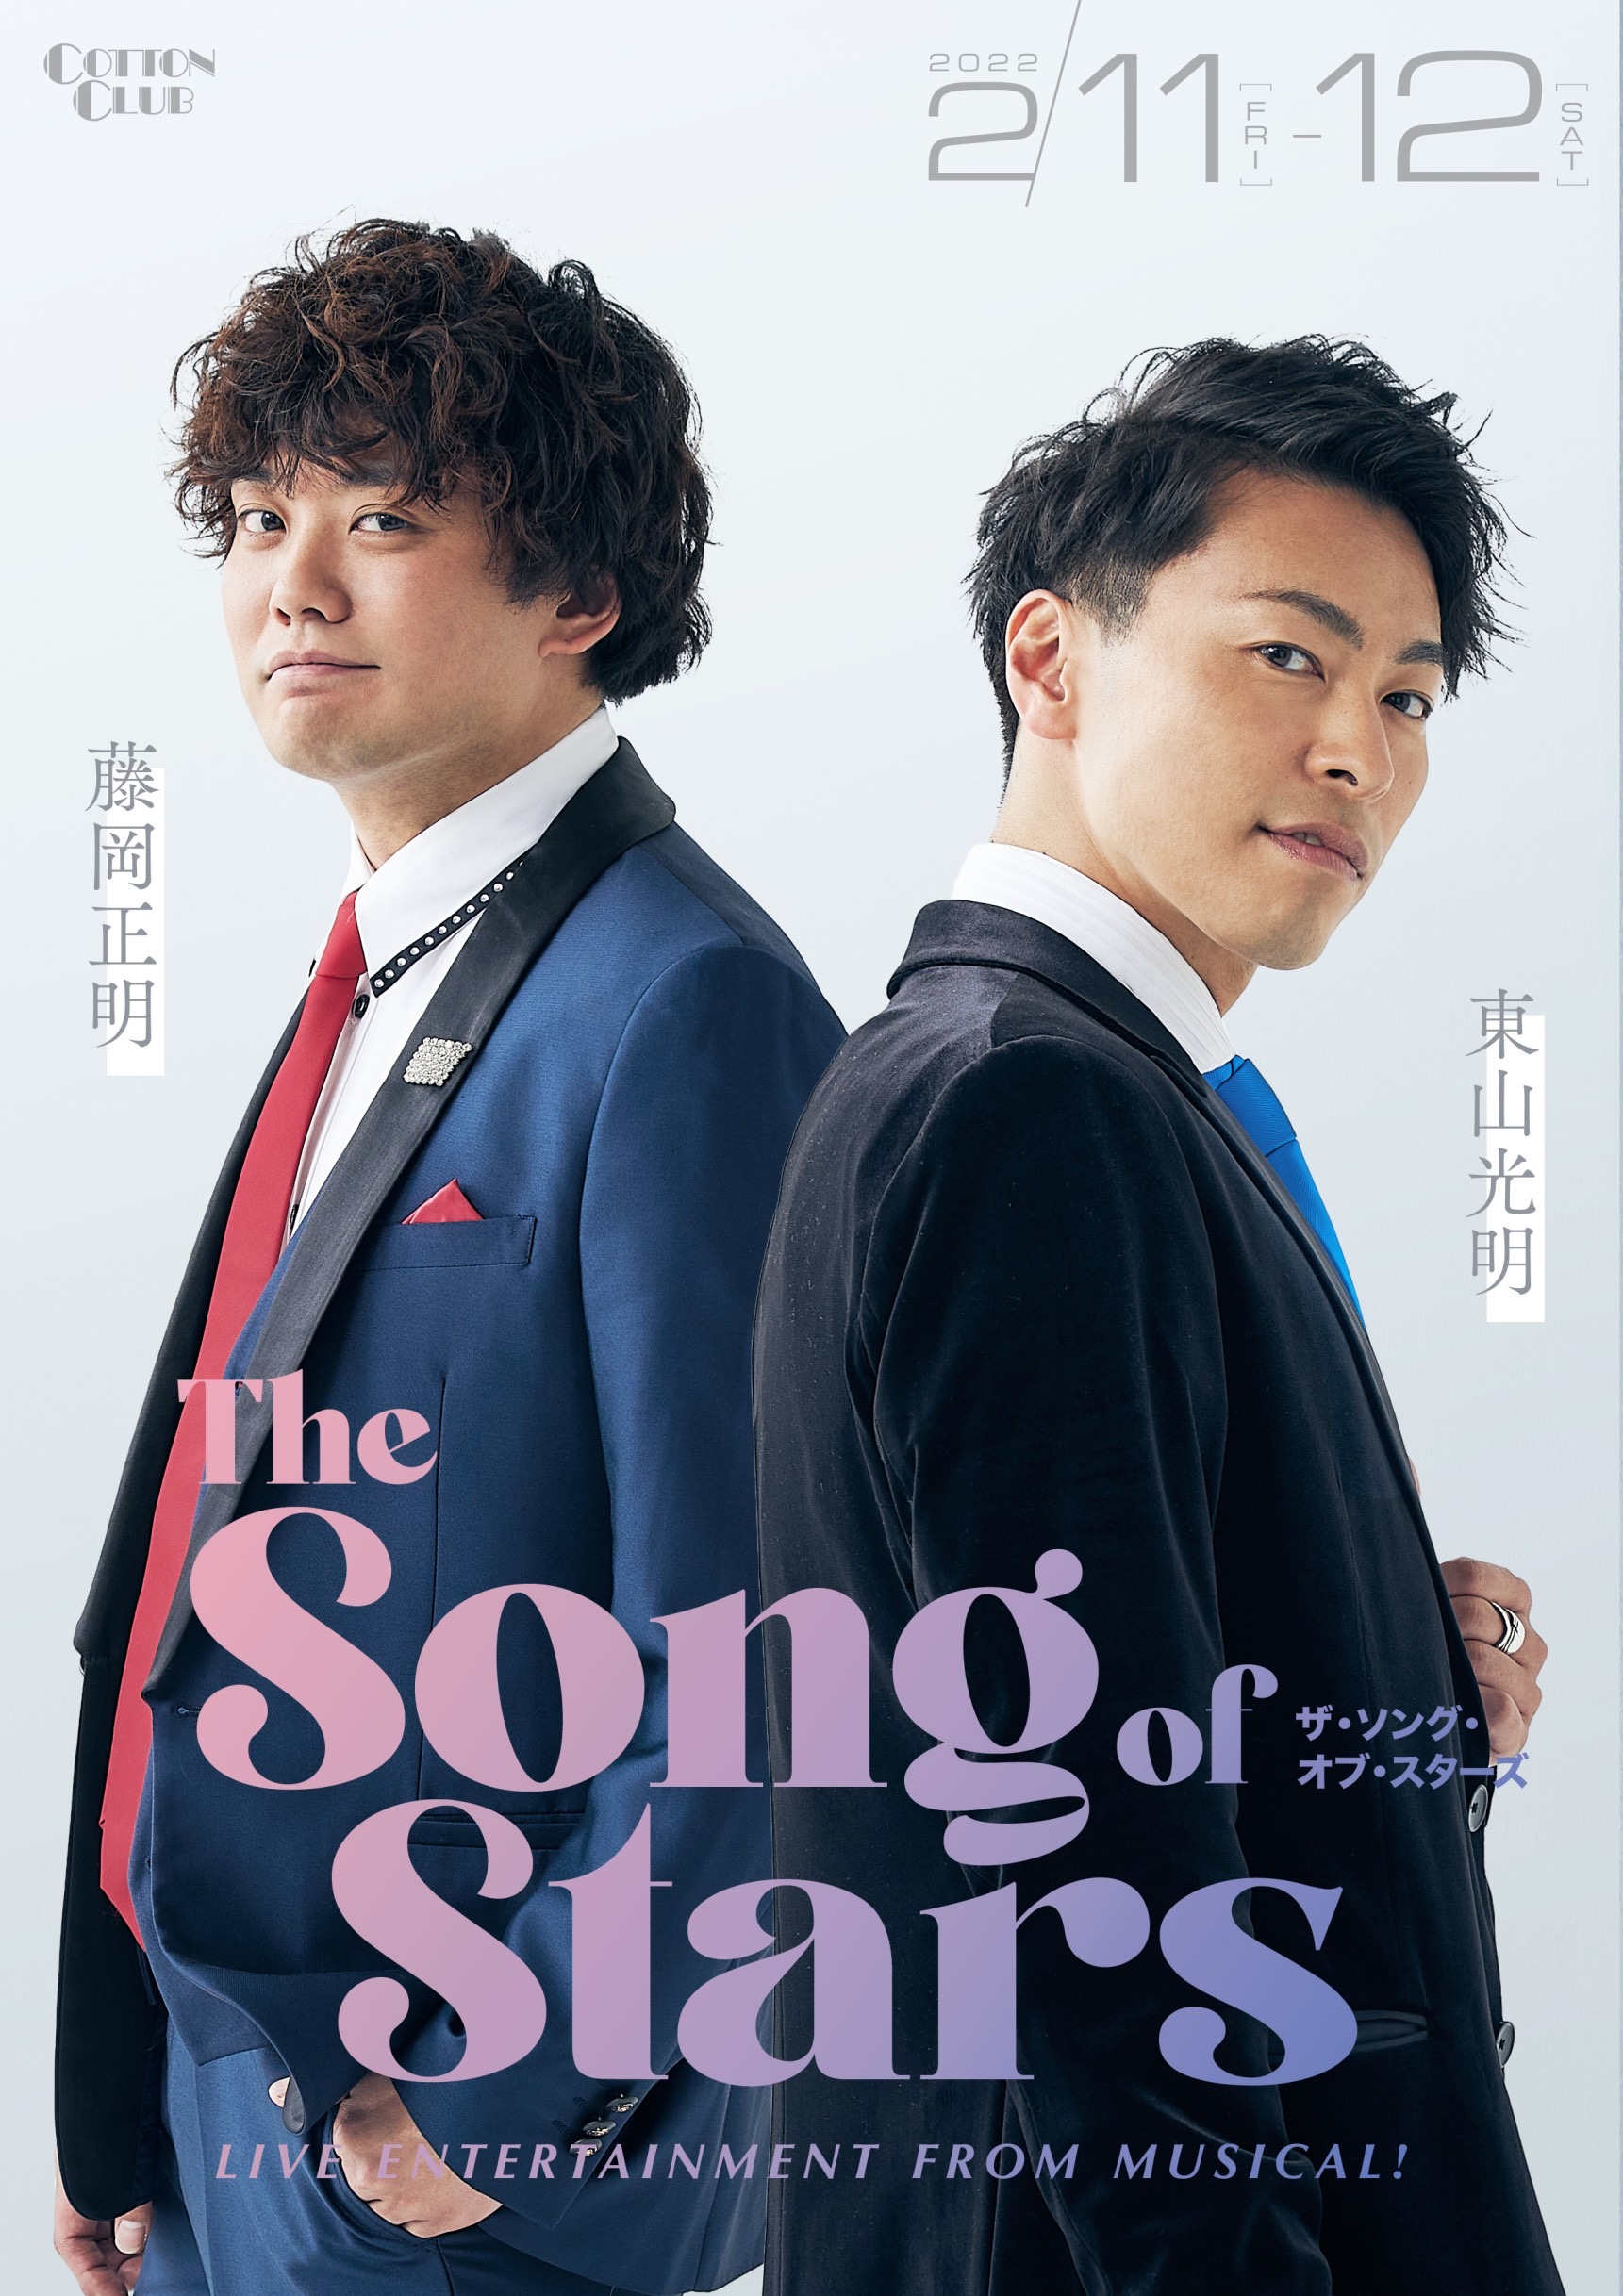 【2/11 1st.show】東山光明×藤岡正明『The Song of Stars』 ～Live Entertainment from Musical～